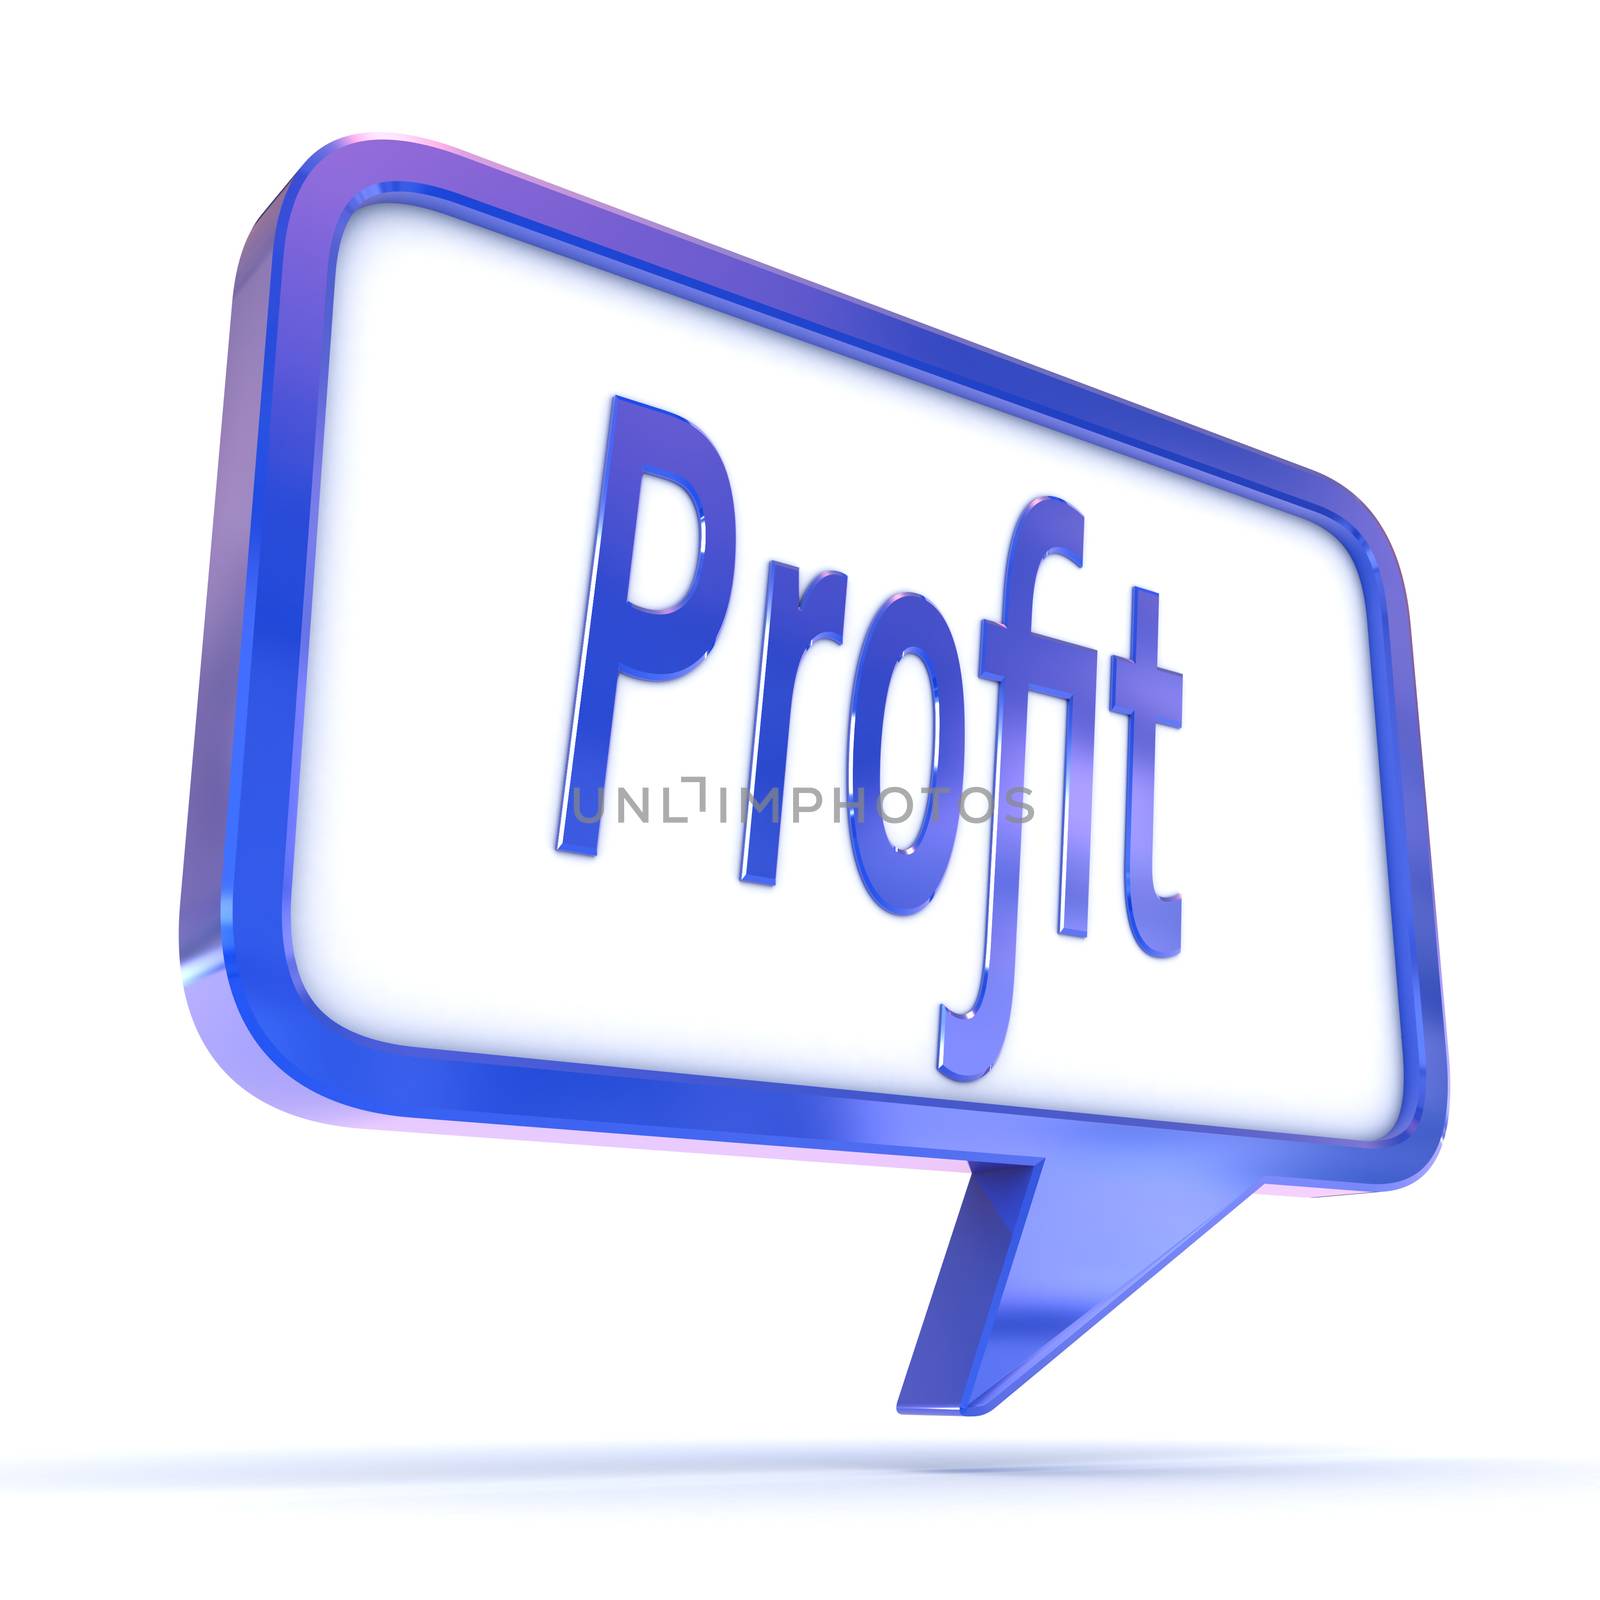 A Colourful 3d Rendered Concept Illustration showing "Profit" in a Speech Bubble